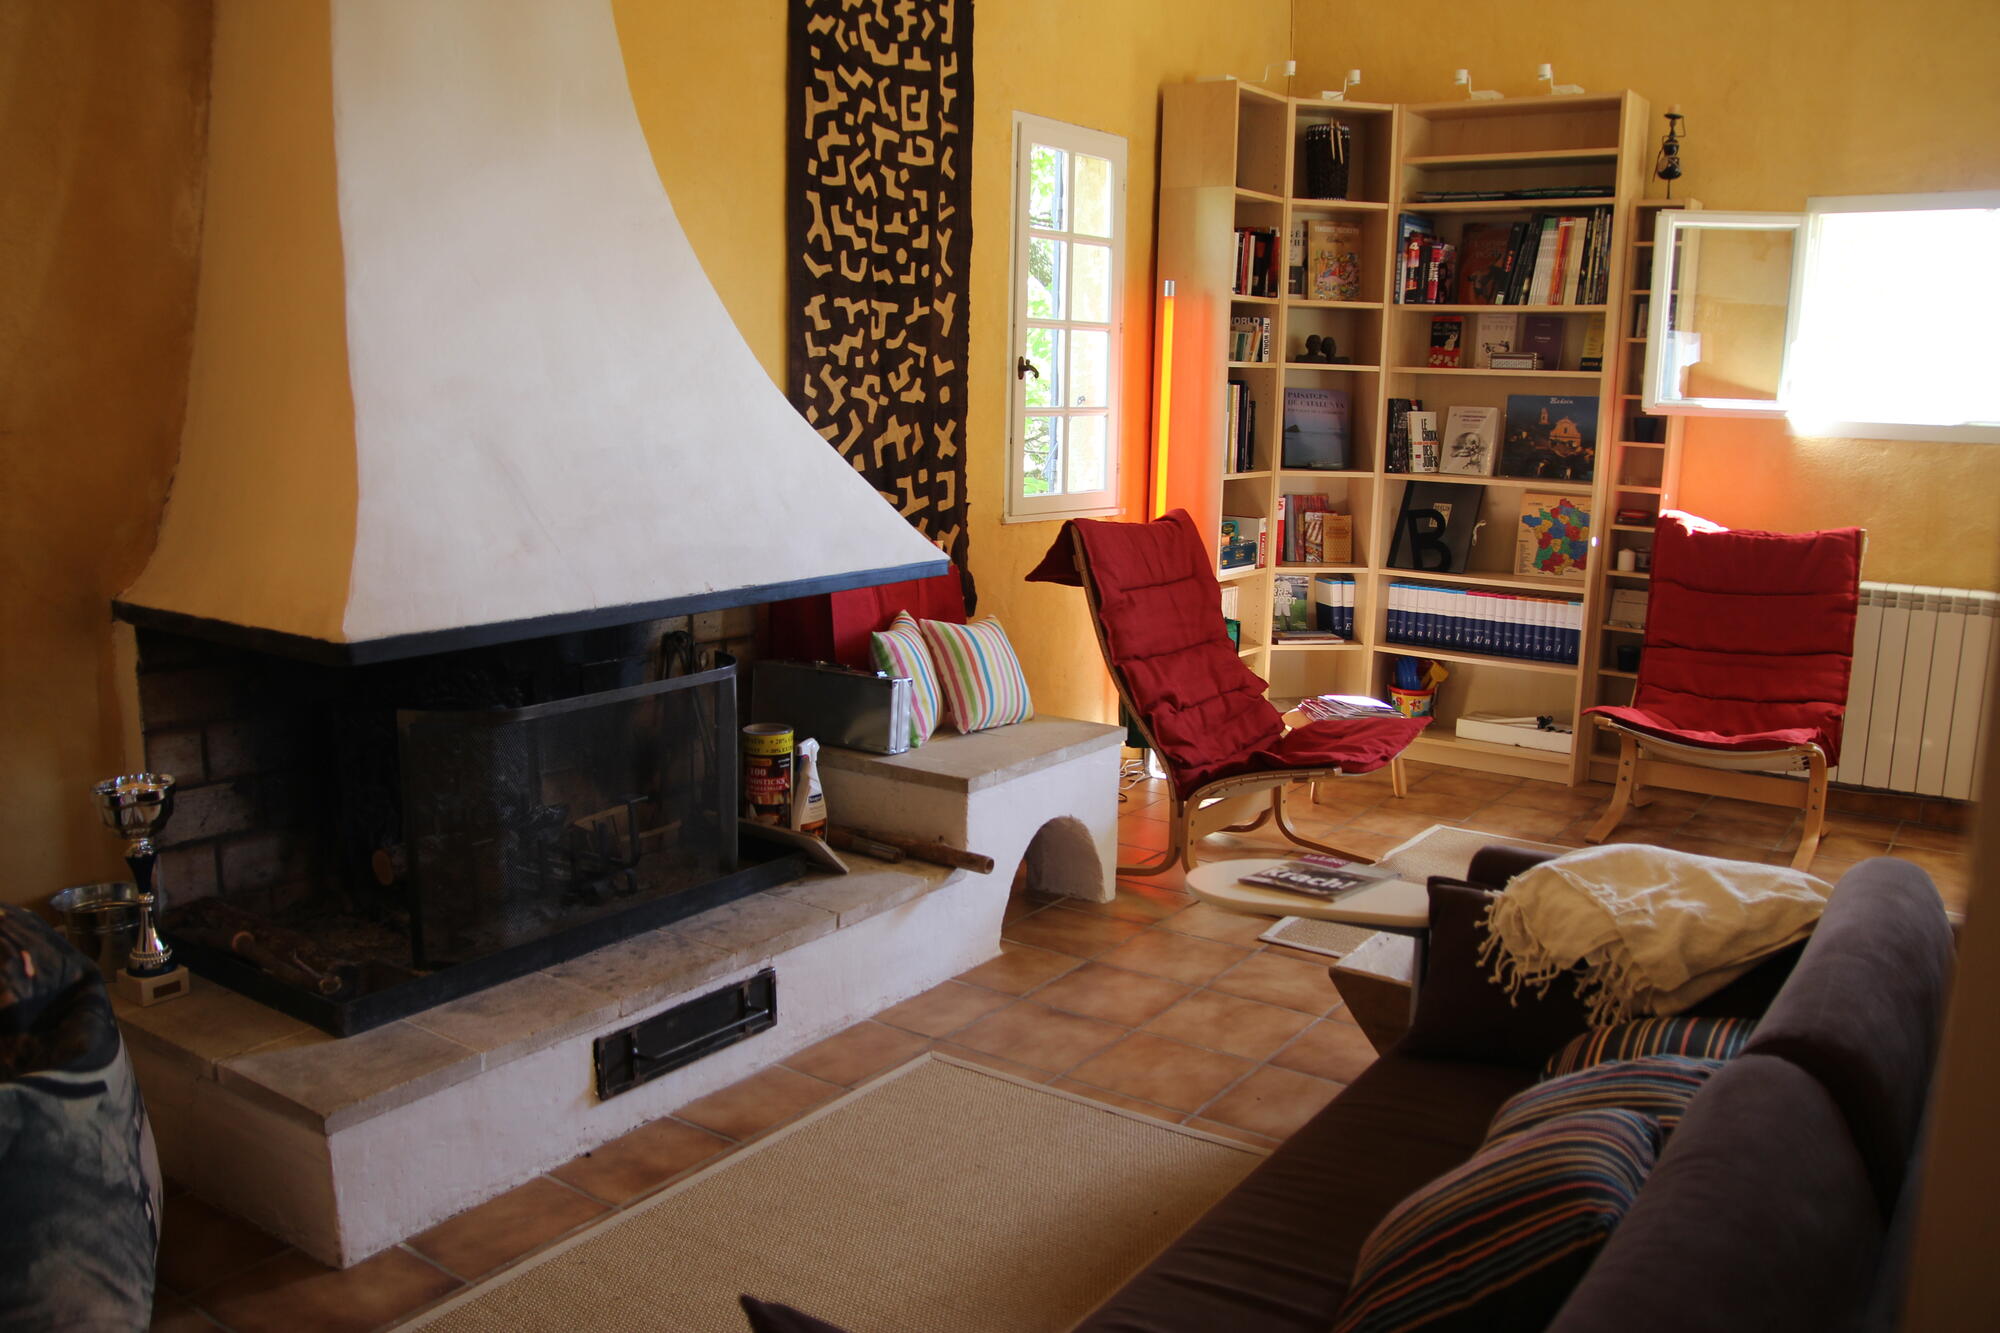 Lounge and open fire place